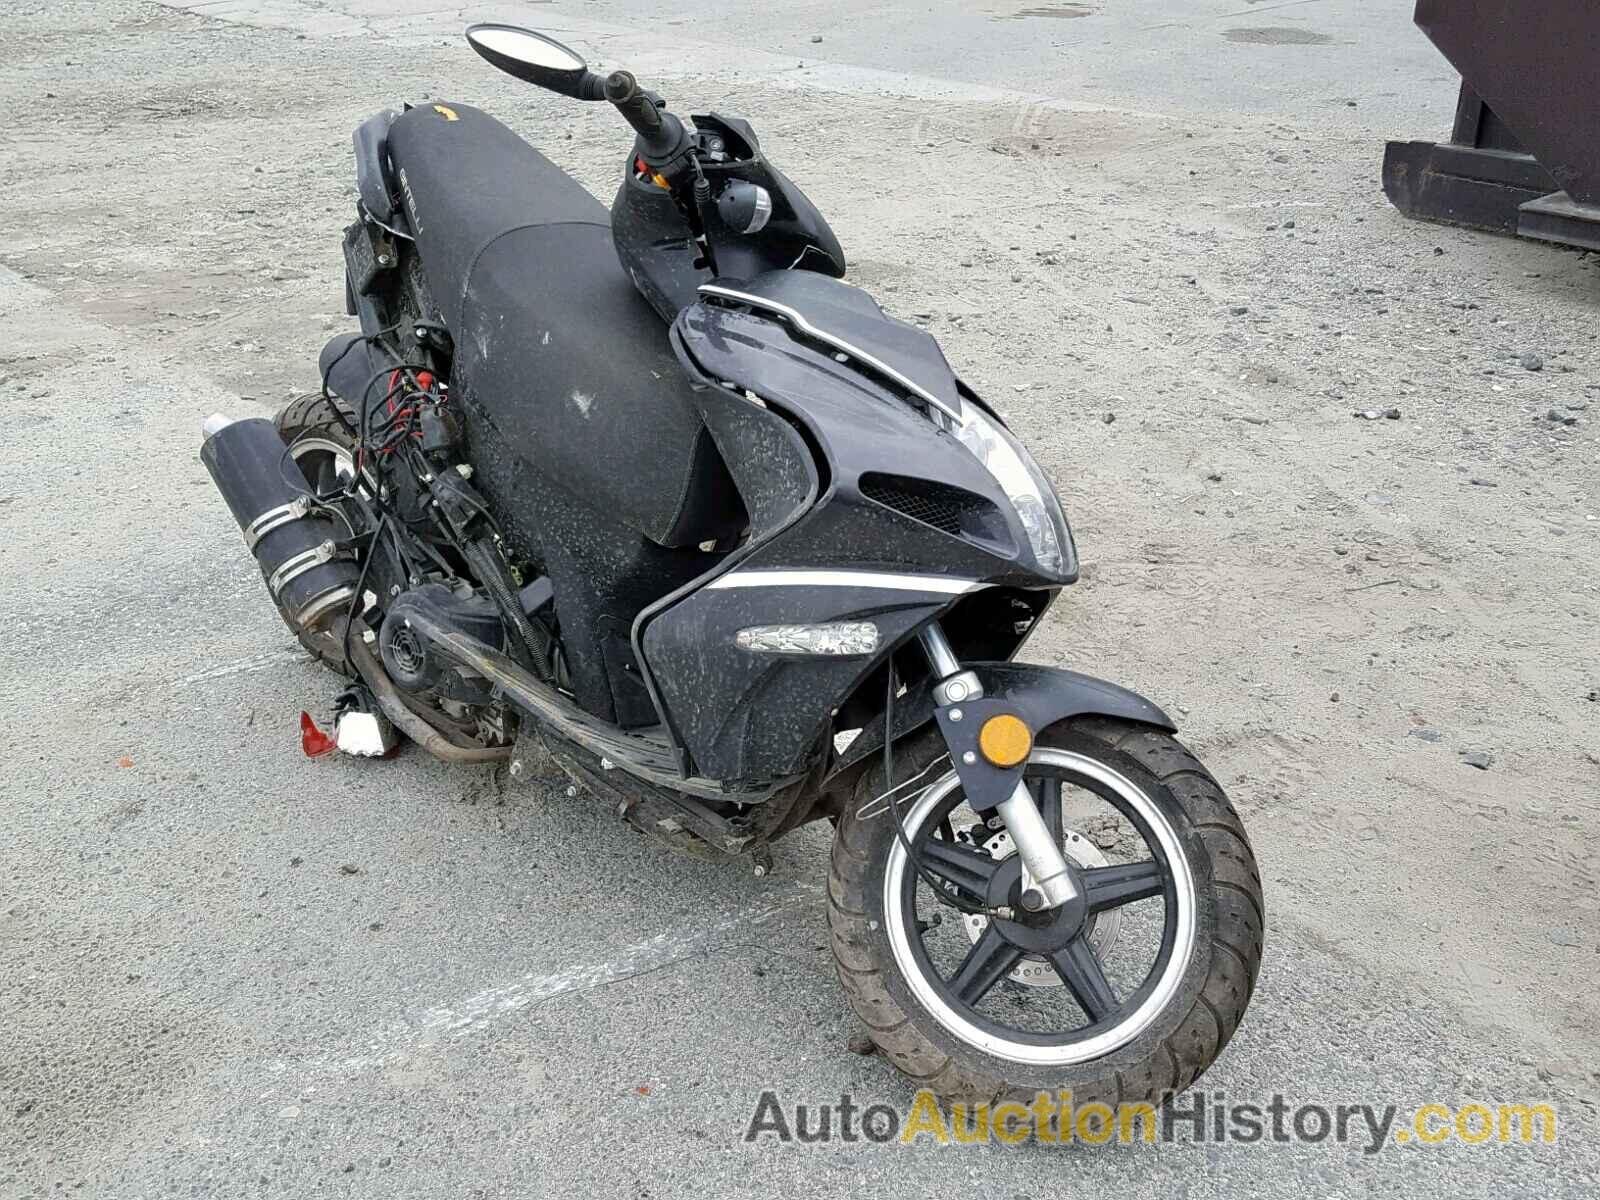 2018 OTHER SCOOTER, LLPVGBAD7J1G21496